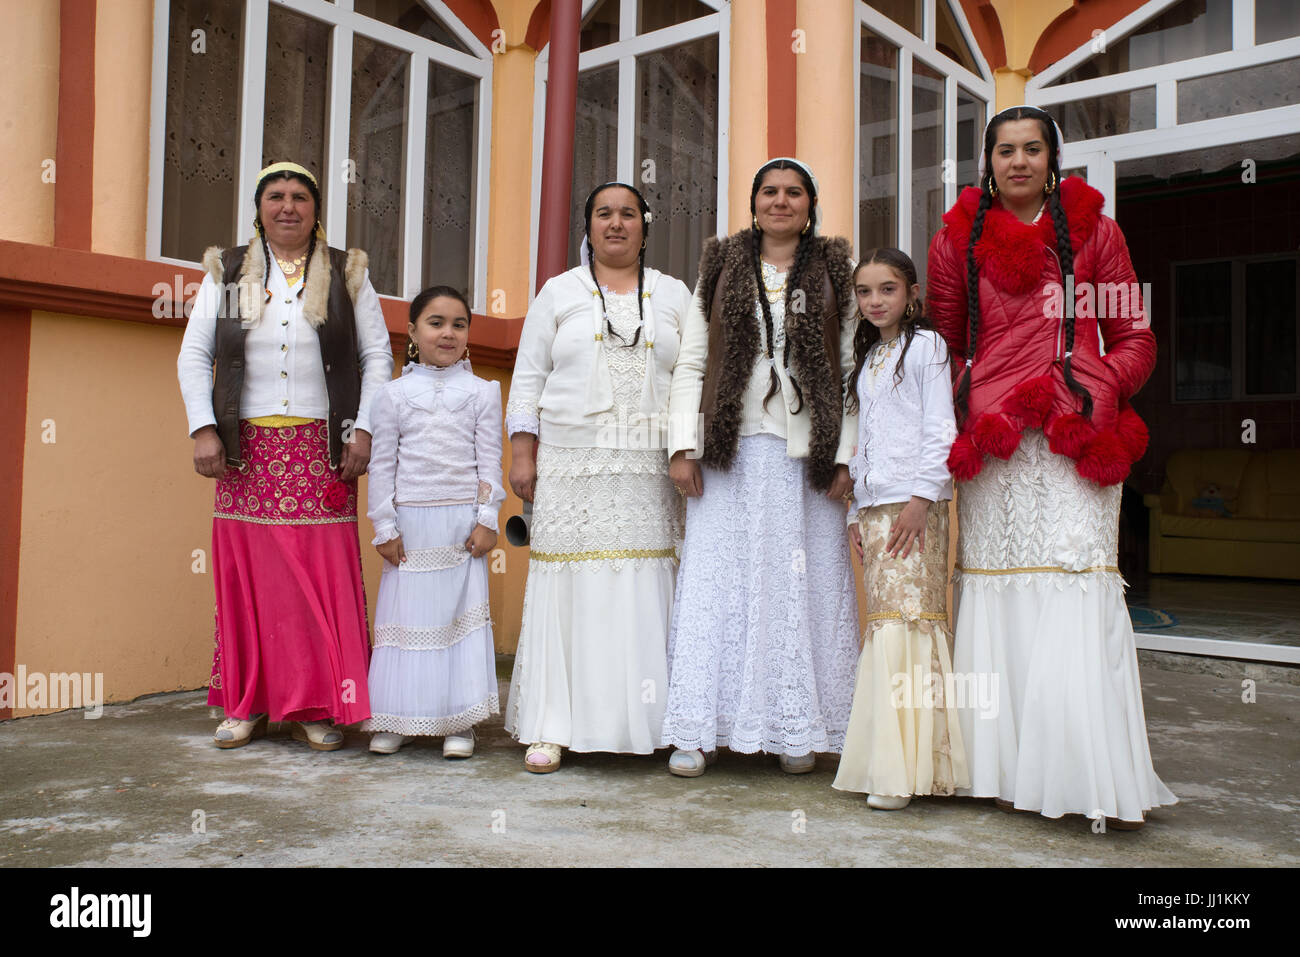 Women and girls of a Rom wealthy family in front of their luxury house, Ivanesti, Romania Stock Photo